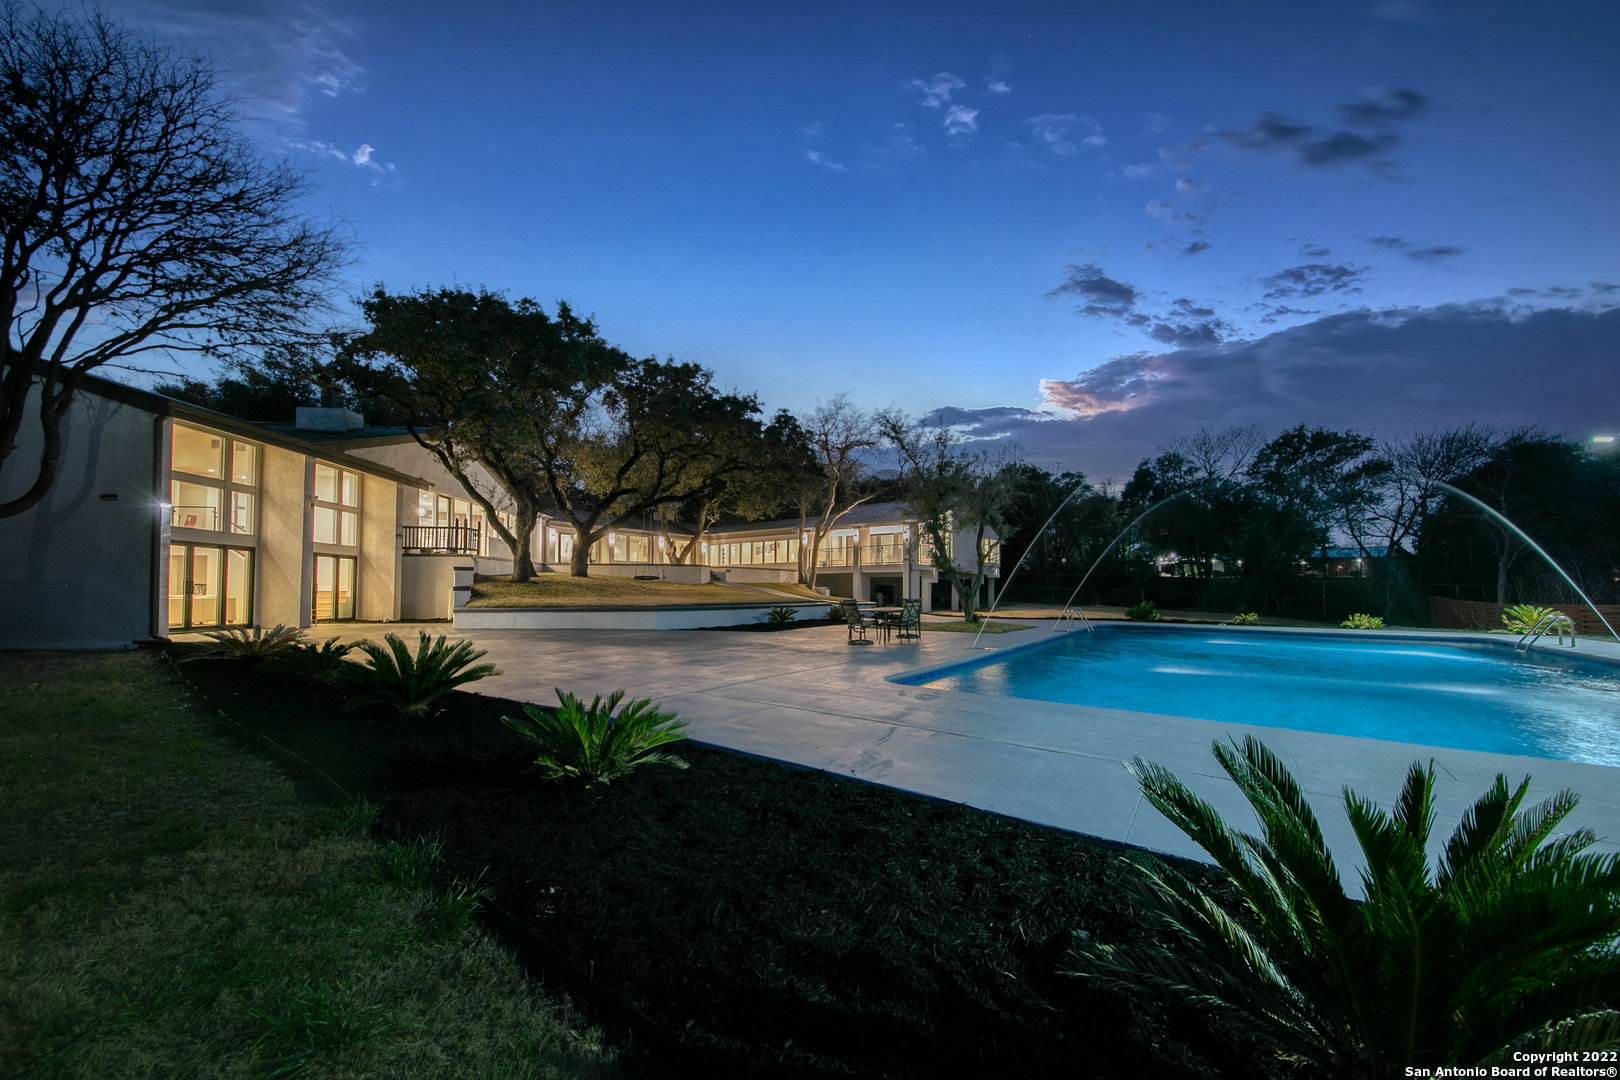 Introducing an exquisite, magnificent, luxury mid-century modern grandeur estate located in the Alamo Heights Independent School District! Skillfully placed in the back of a deep-set front lawn and shaded by mature oak trees, this gorgeously renovated and redesigned one-level architectural marvel boasts of aesthetics rarely available in modern homes. The amalgamation of modern features with historical details are a well-kept secret of this palatial marvel that offers the utmost security, serenity, and privacy.     The grandiose master suite boasts of a stupendous walk-in closet, soaring ceilings, designer bathroom with mighty marble-ensconced spa-like bath & glassed-in shower, vessel tub, double quartz topped vanity, and an attached porch that overlooks the colossal pool and a carefully manicured backyard. In addition to the four bedrooms and a gourmet kitchen with an oversized island & a spacious butler's pantry, the home boasts of two massive living rooms, dining room, study room, and a flex room. Experience serene indoor-outdoor living through sweeping panoramic windows and sliding glass doors that open onto an incredible idyllic backyard oasis comprising of expansive patios & four beautiful terraces covered with mature oak trees and a cosmic pool with ~65,000 gallons of sparkling water & fountains.     The hallmark of this property is an open floor concept accentuated by natural lighting through nearly 70 expansive windows, sophisticated modern interiors with utmost attention to details, high ceilings, generously sized rooms, three beautiful stone fireplaces, and suave white oak and marble floors. Presence of soundproof doors and windows, four air-conditioning zones and double roof makes this home energy efficient. Essentially your own private resort on an oversized 1.27 acre lot in the heart of San Antonio, this refined residence provides the perfect union of design, lux livability, and privacy. Proximity to I-410 makes the location of this property very convenient to access downtown, medical center, quarry marketplace, two large universities, the airport, and major schools (AHISD and Saint Mary's Hall). It's a true rarity & must see!